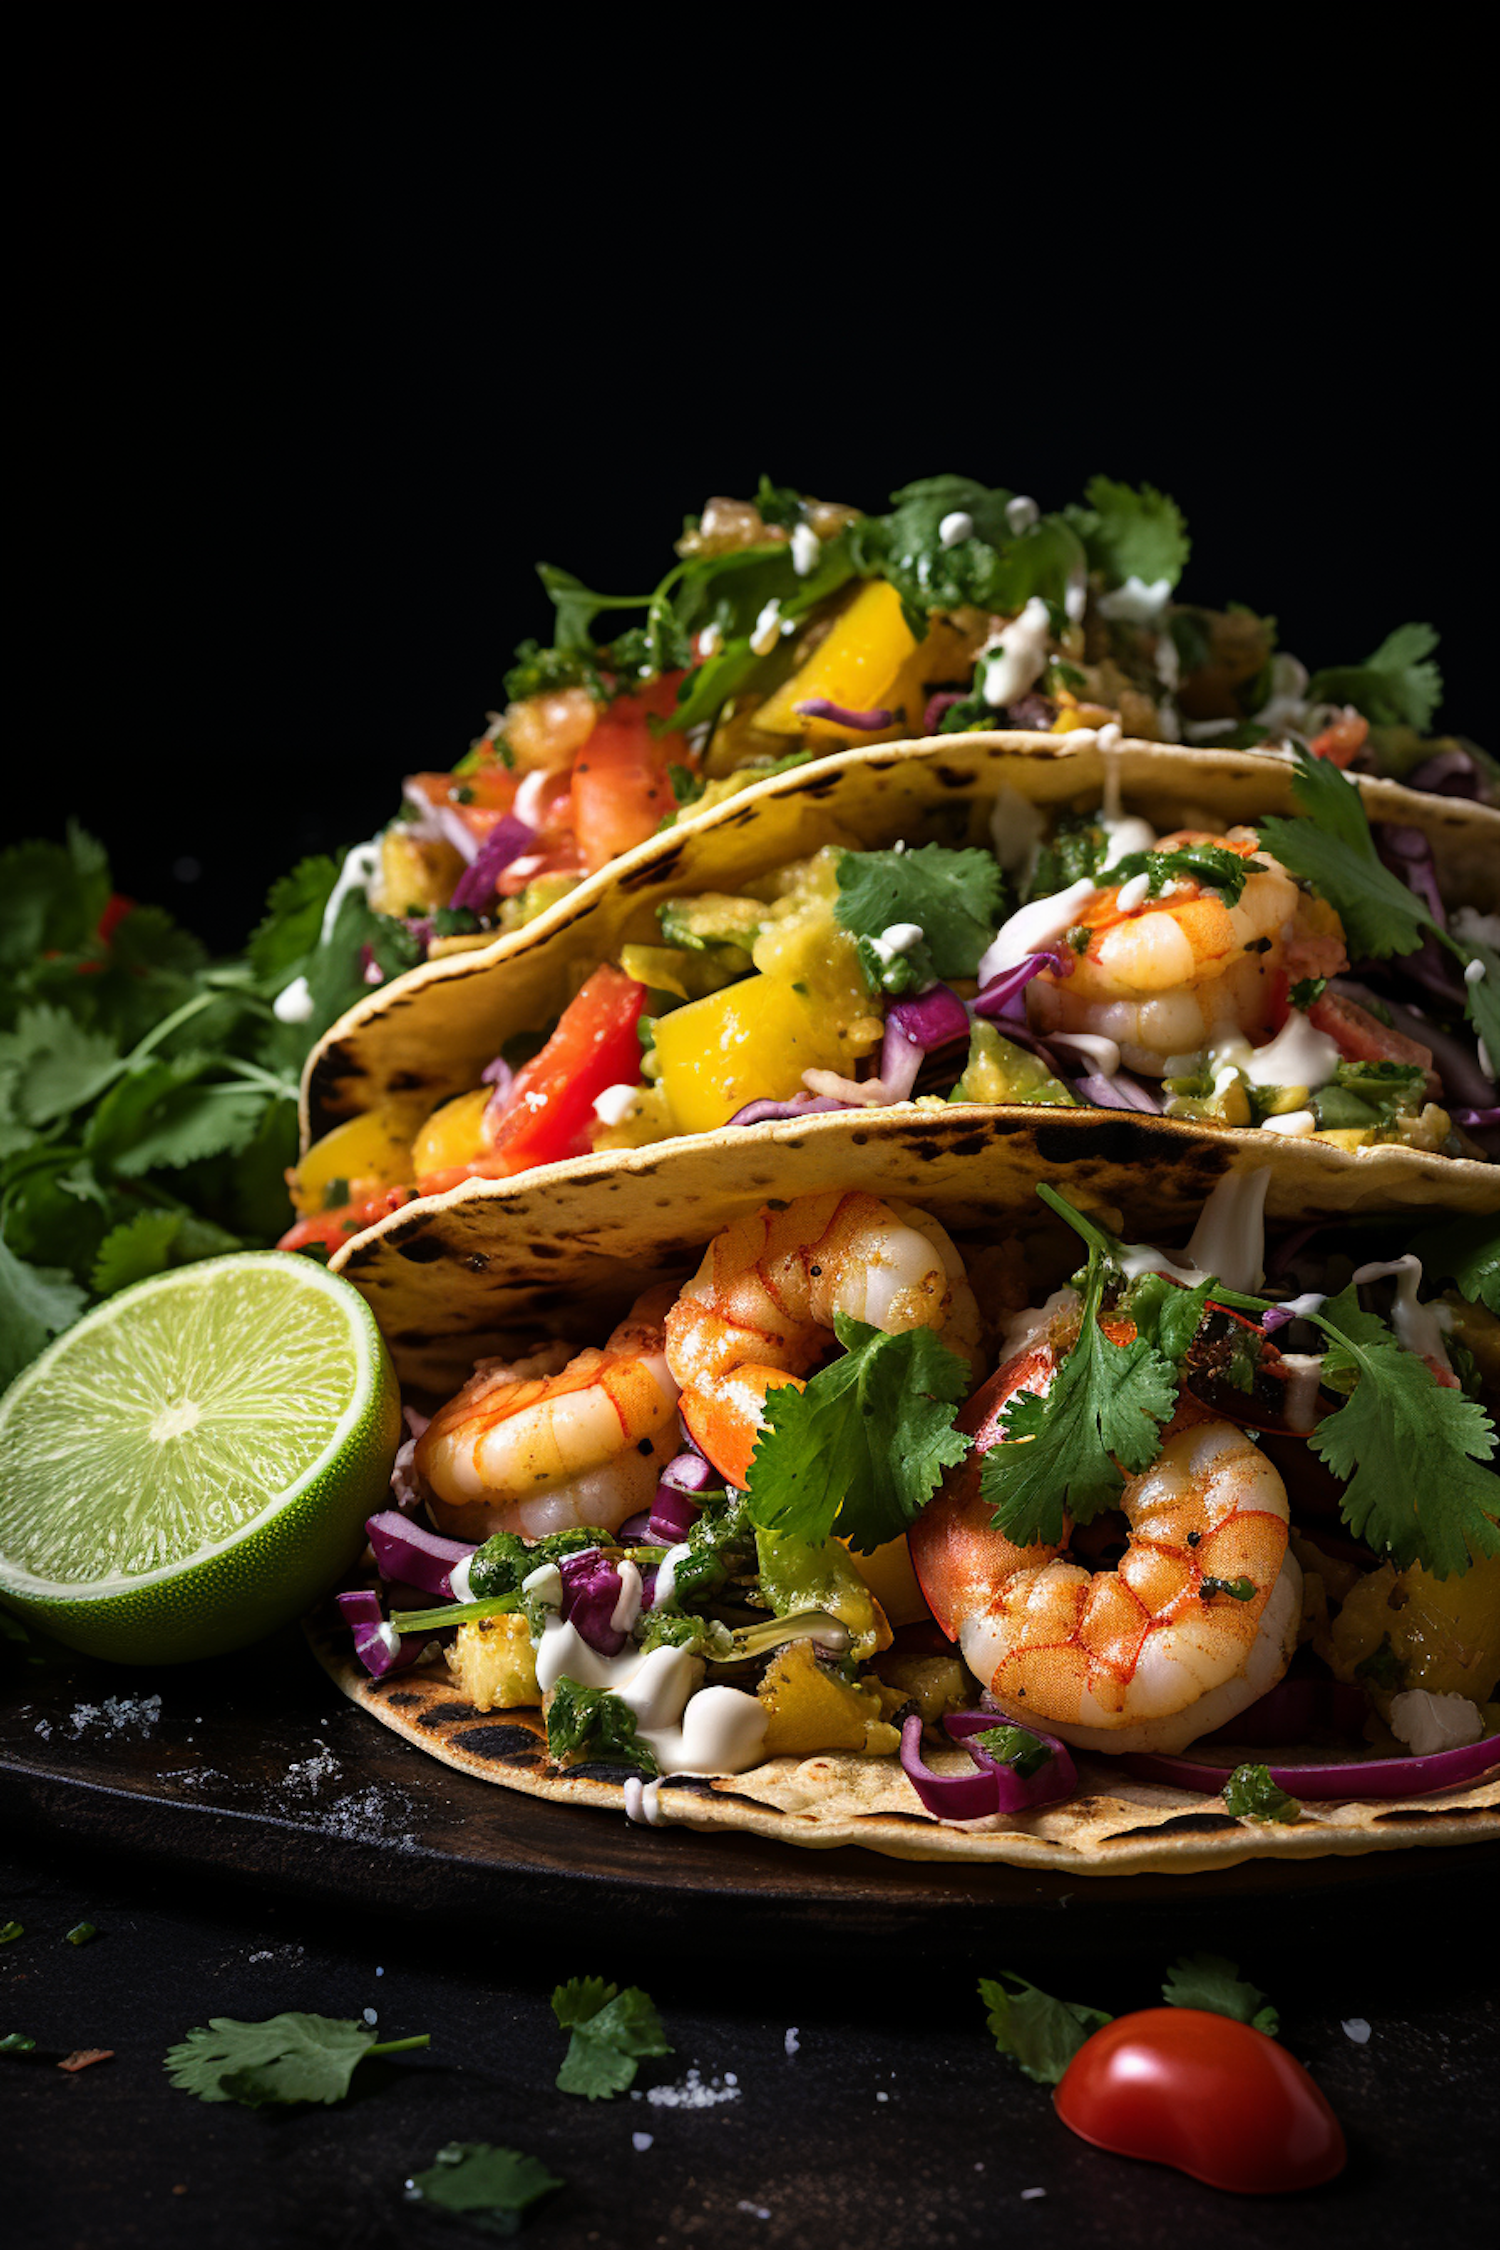 Vibrant Shrimp Taco Trio with Colorful Vegetables and Creamy Sauce